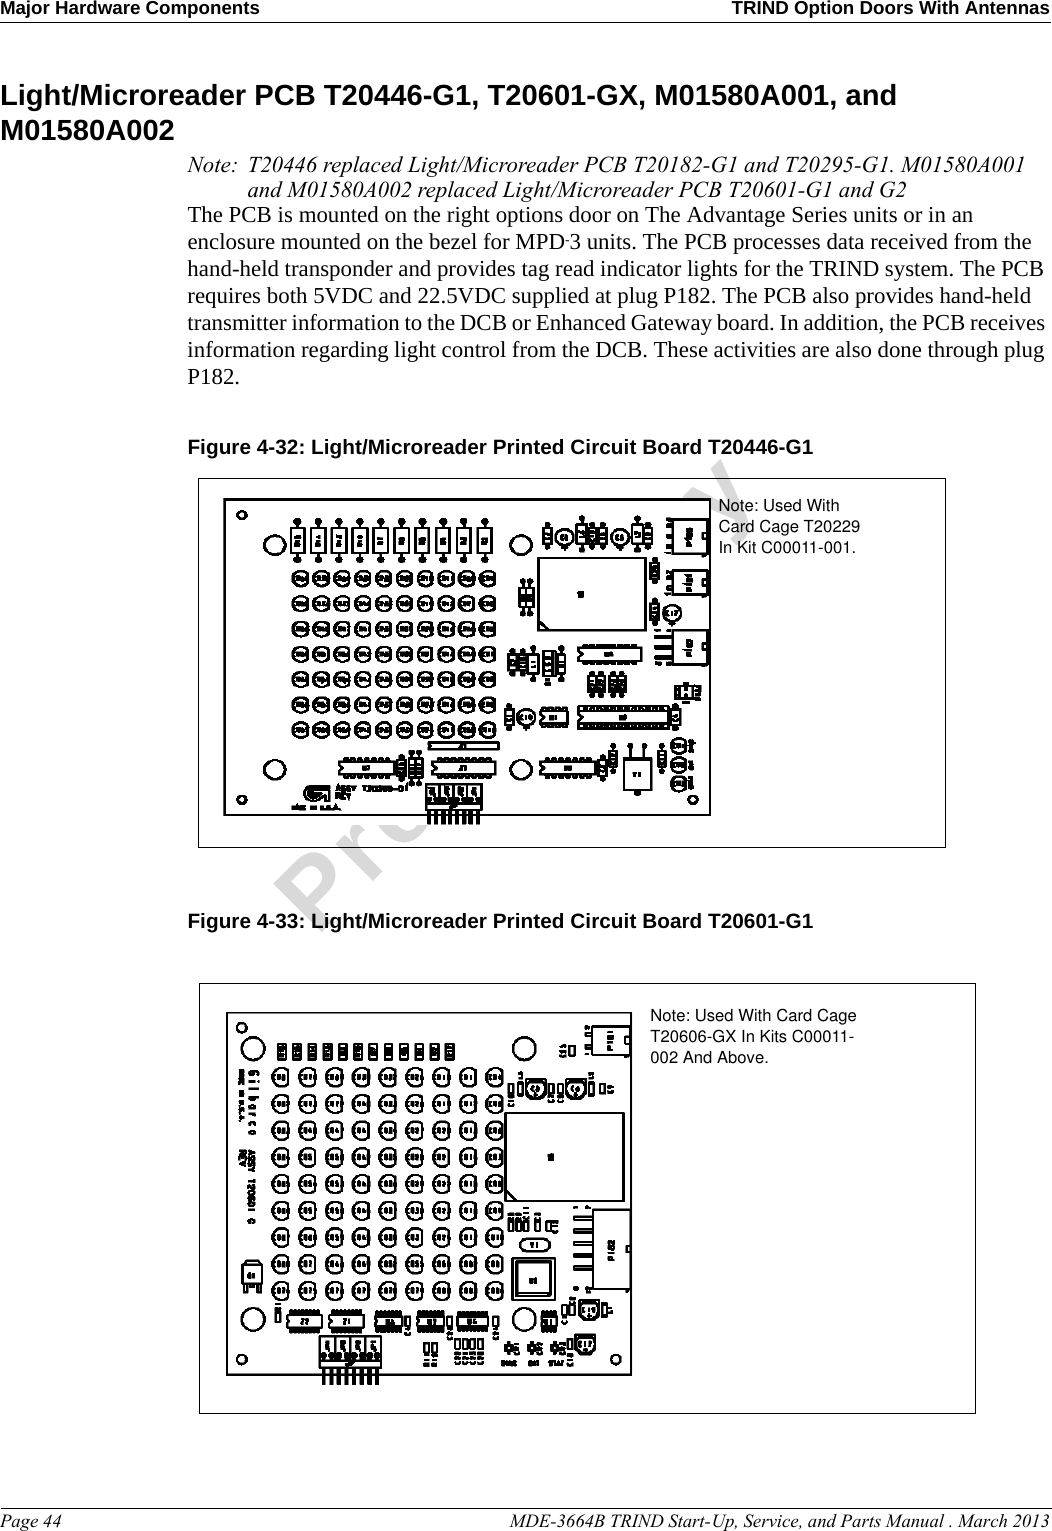 Major Hardware Components TRIND Option Doors With AntennasPage 44                                                                                                  MDE-3664B TRIND Start-Up, Service, and Parts Manual . March 2013PreliminaryLight/Microreader PCB T20446-G1, T20601-GX, M01580A001, and M01580A002Note: T20446 replaced Light/Microreader PCB T20182-G1 and T20295-G1. M01580A001 and M01580A002 replaced Light/Microreader PCB T20601-G1 and G2The PCB is mounted on the right options door on The Advantage Series units or in an enclosure mounted on the bezel for MPD-3 units. The PCB processes data received from the hand-held transponder and provides tag read indicator lights for the TRIND system. The PCB requires both 5VDC and 22.5VDC supplied at plug P182. The PCB also provides hand-held transmitter information to the DCB or Enhanced Gateway board. In addition, the PCB receives information regarding light control from the DCB. These activities are also done through plug P182.Figure 4-32: Light/Microreader Printed Circuit Board T20446-G1Note: Used With Card Cage T20229 In Kit C00011-001.Figure 4-33: Light/Microreader Printed Circuit Board T20601-G1Note: Used With Card Cage T20606-GX In Kits C00011-002 And Above.